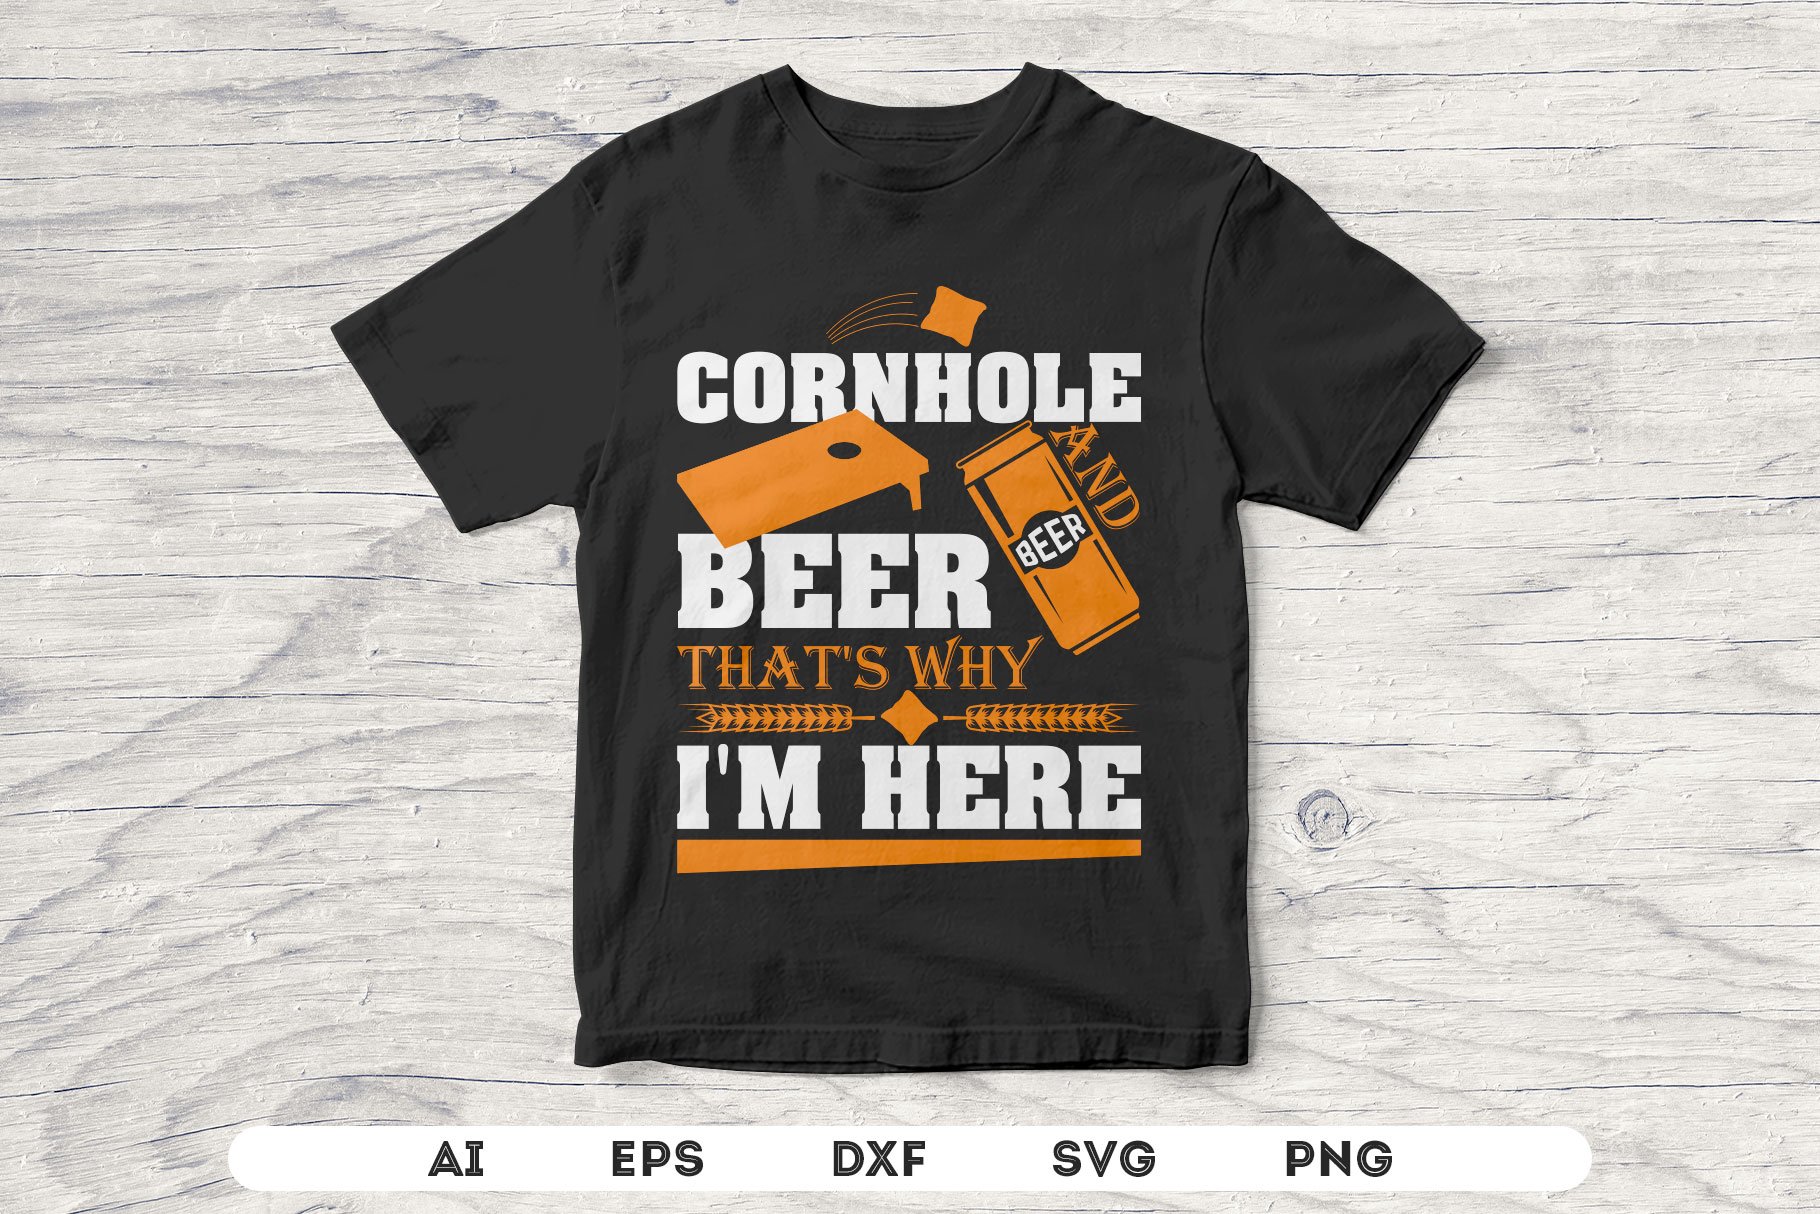 Game Cornhole And Beer Svg File by Vector T-shirt Designs on Dribbble